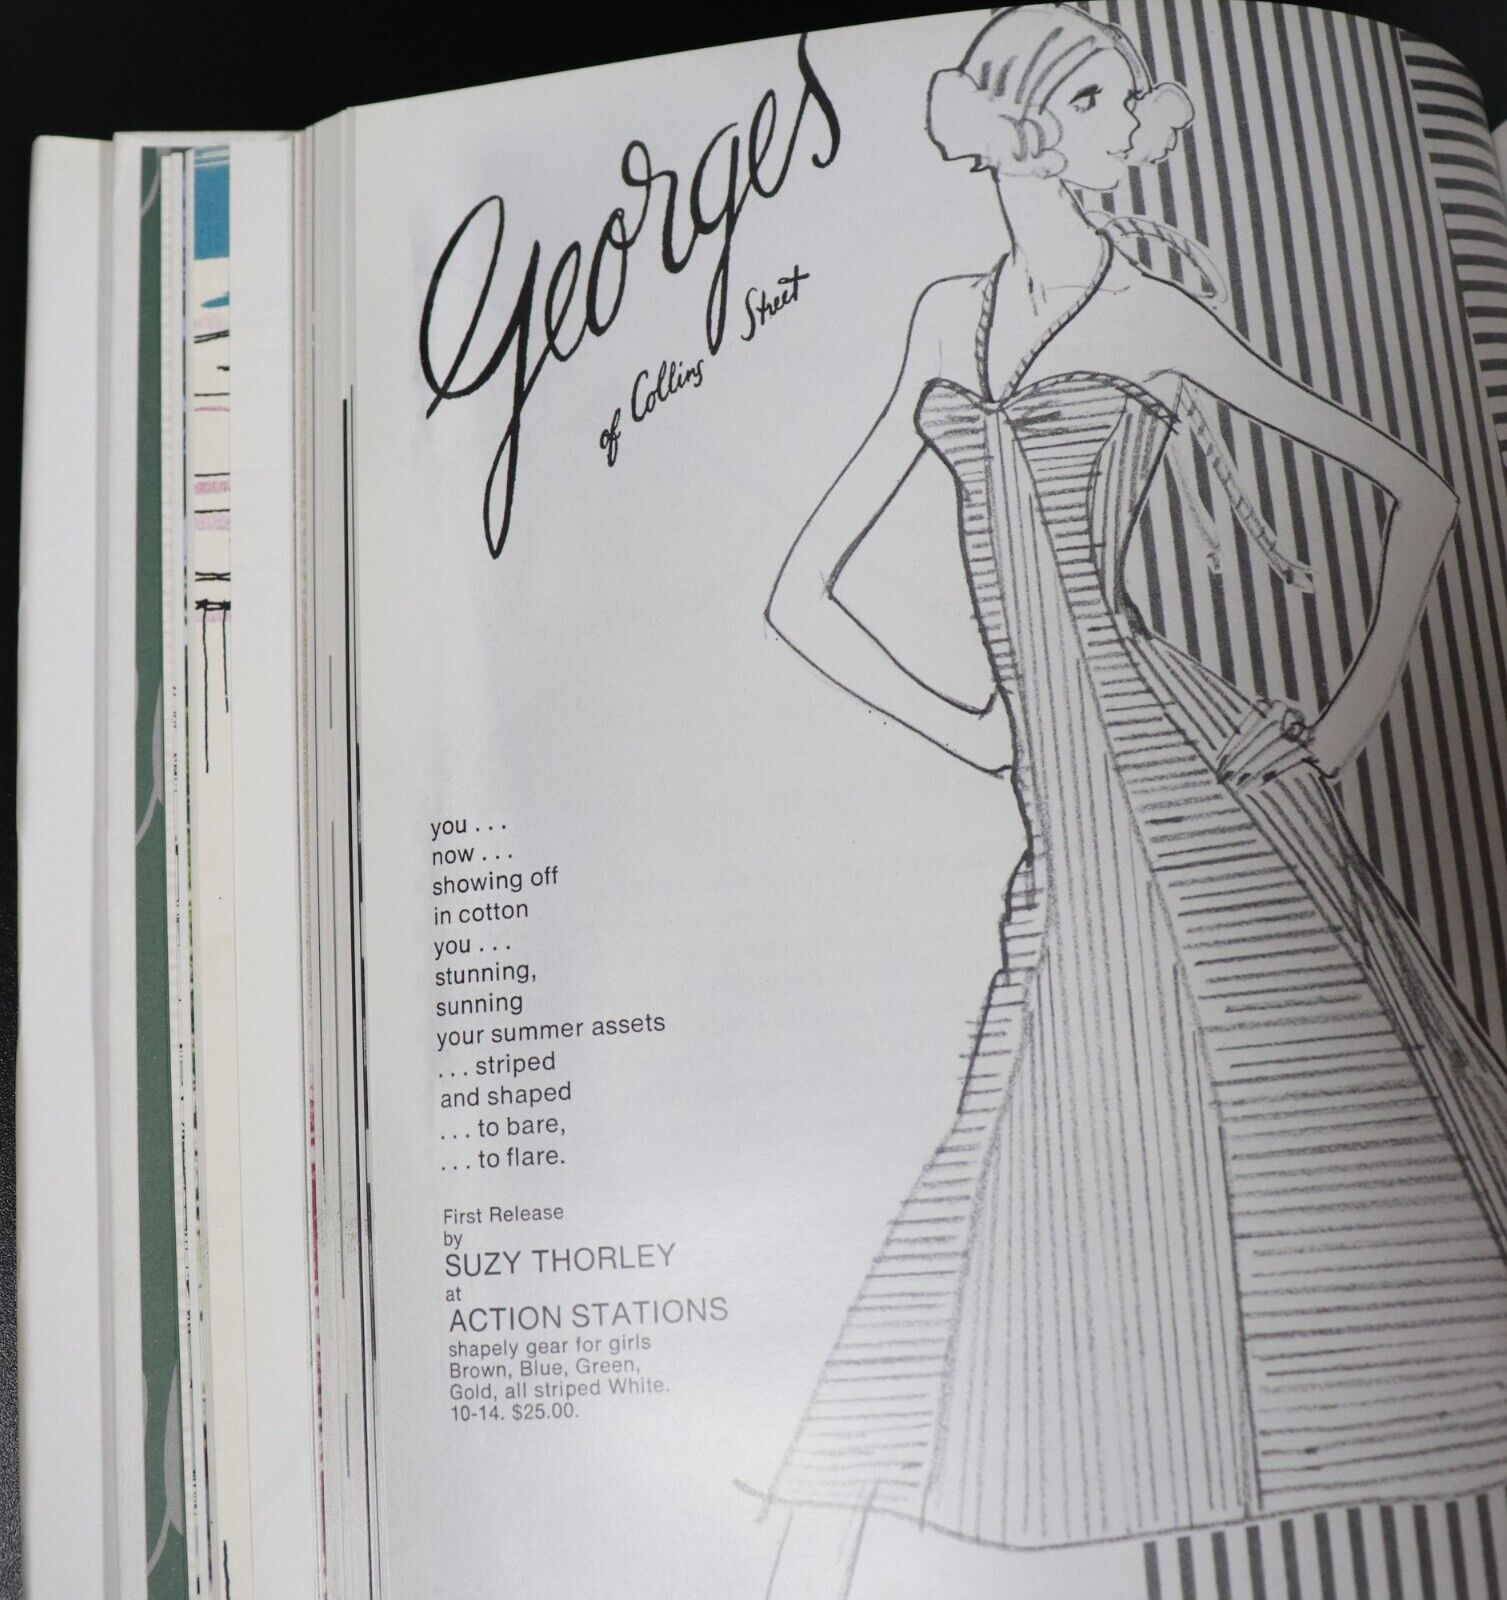 2014 Remembering Georges Australia's Most Elegant Store Retail History Book